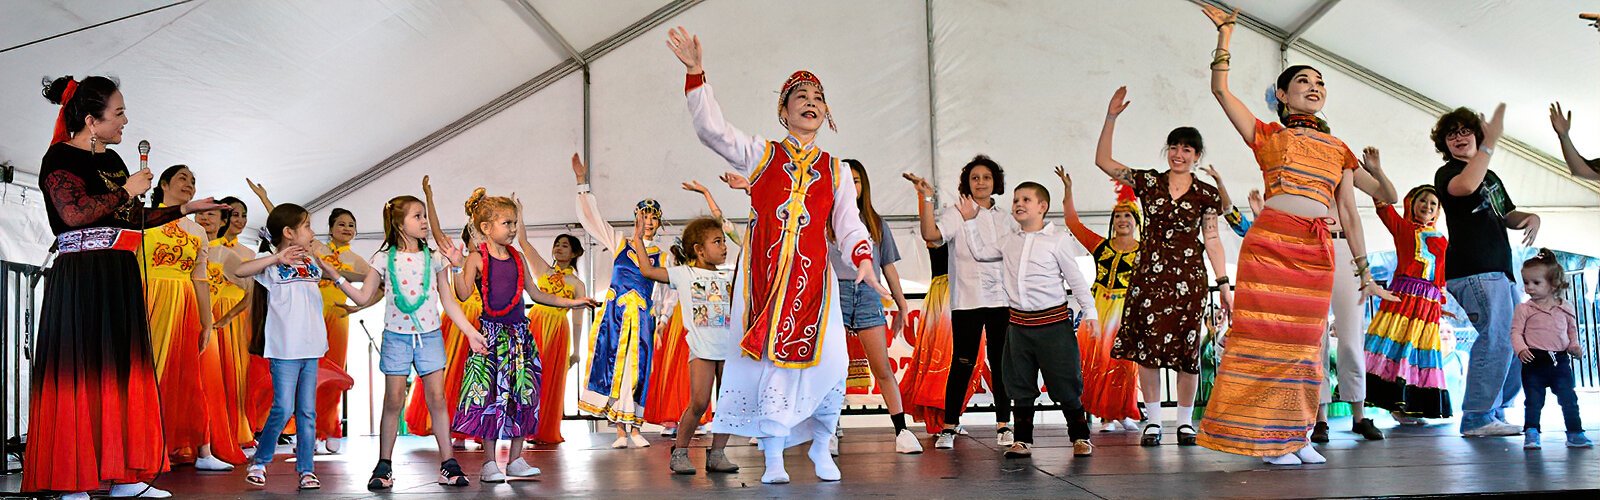 Upon invitation to join the Chinese dancers on stage, some children and adults from the audience learn a few Chinese dance moves.